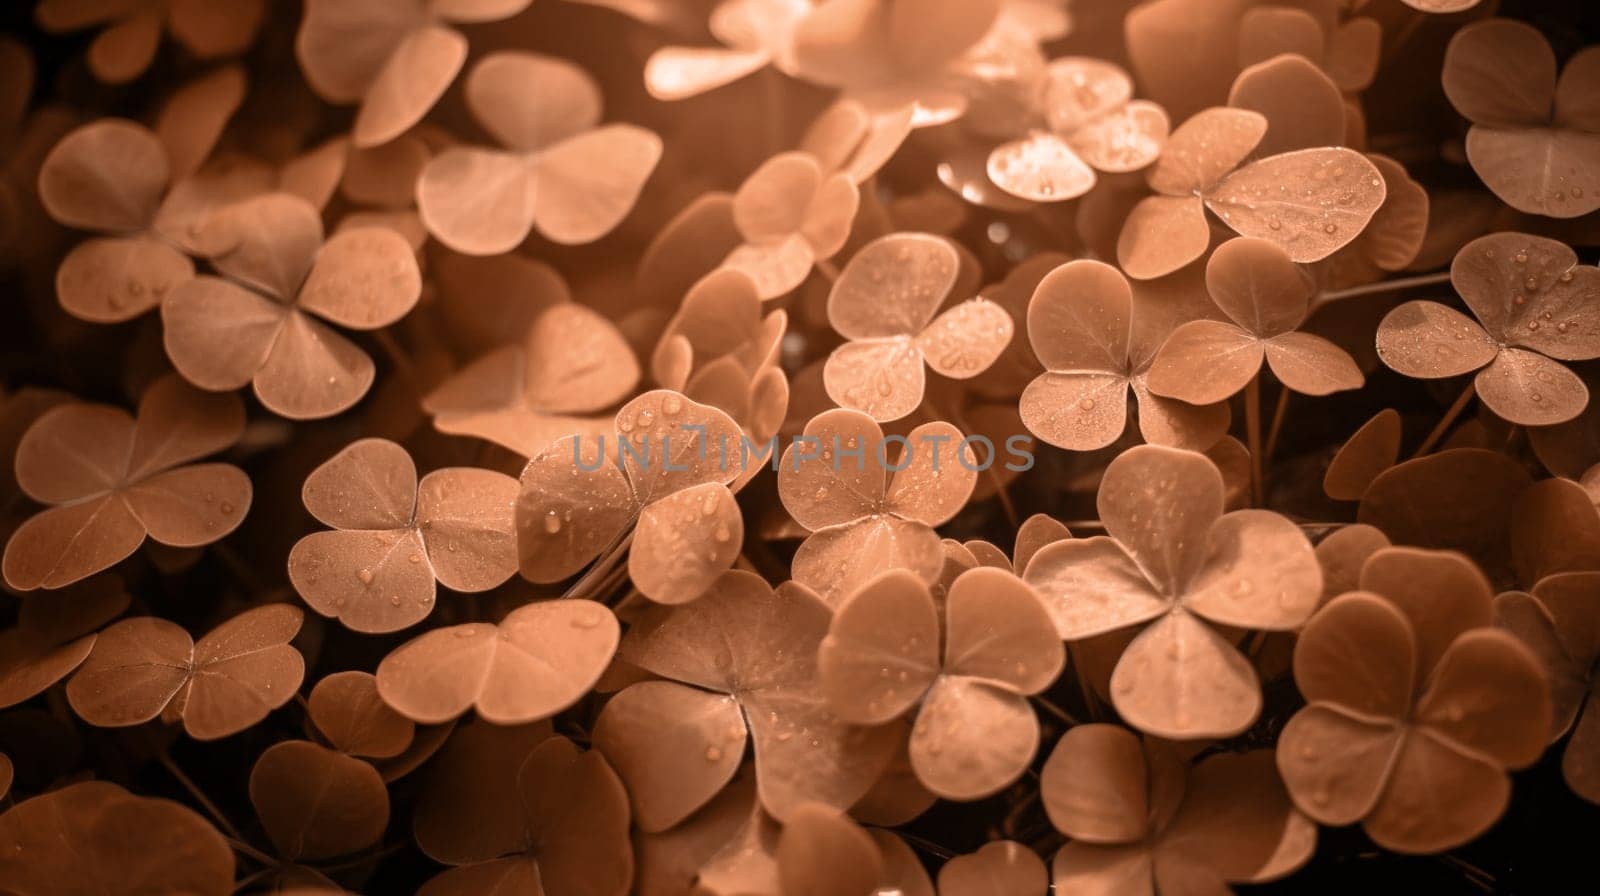 Lucky clover leaves for St. Patrick's Day. Banner with Irish clover leaves. Peach Fuzz toned. High quality photo